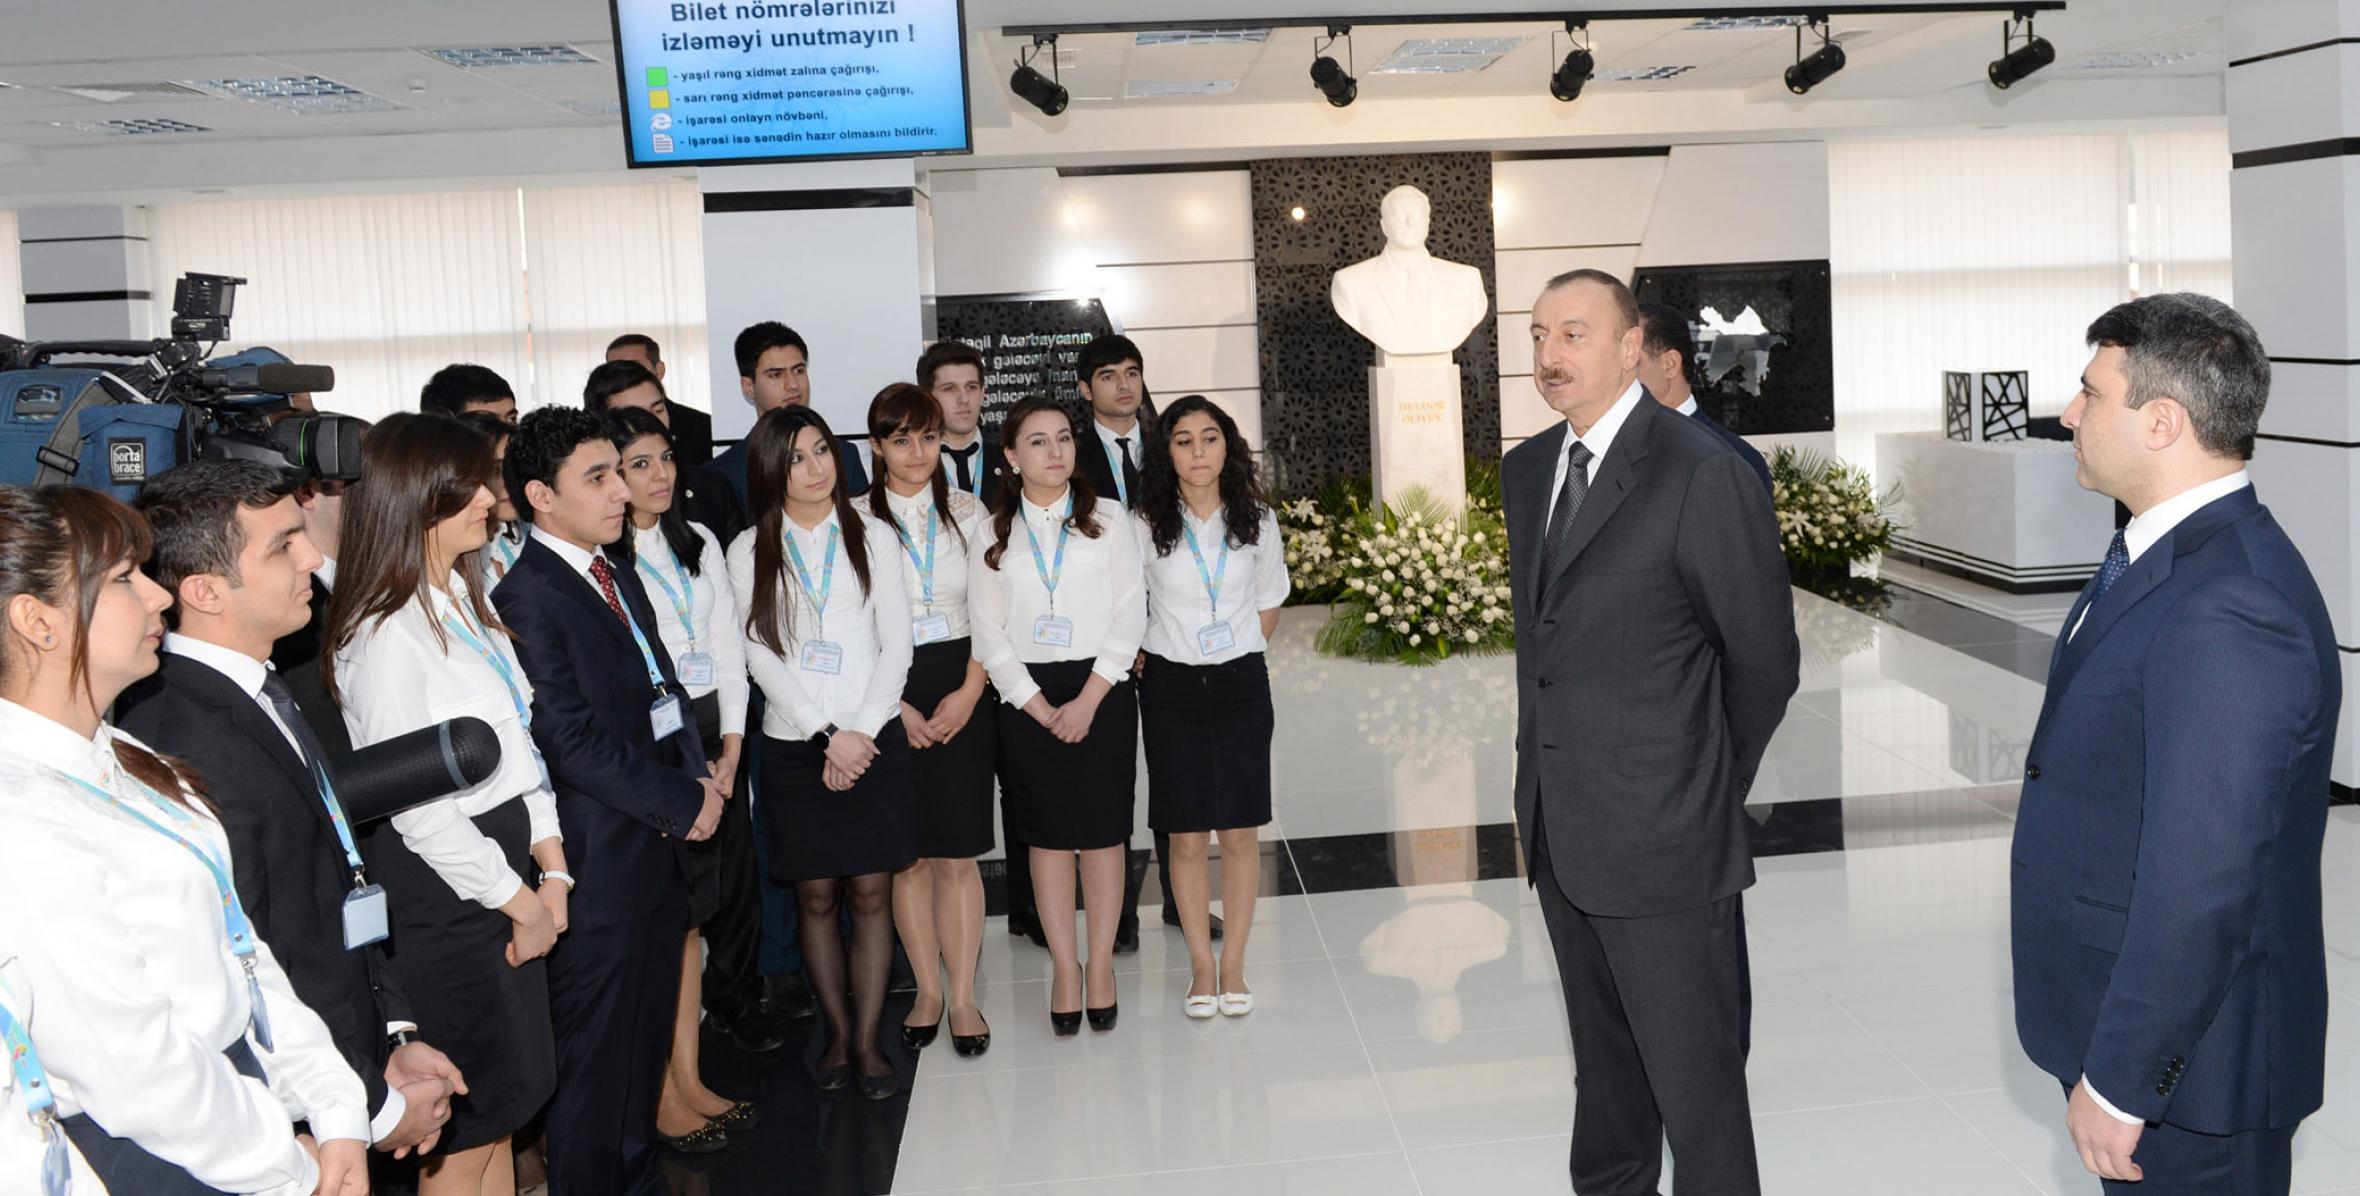 Speech by Ilham Aliyev at the opening of the Ganja “ASAN xidmət” center of the State Agency for public services and social innovations